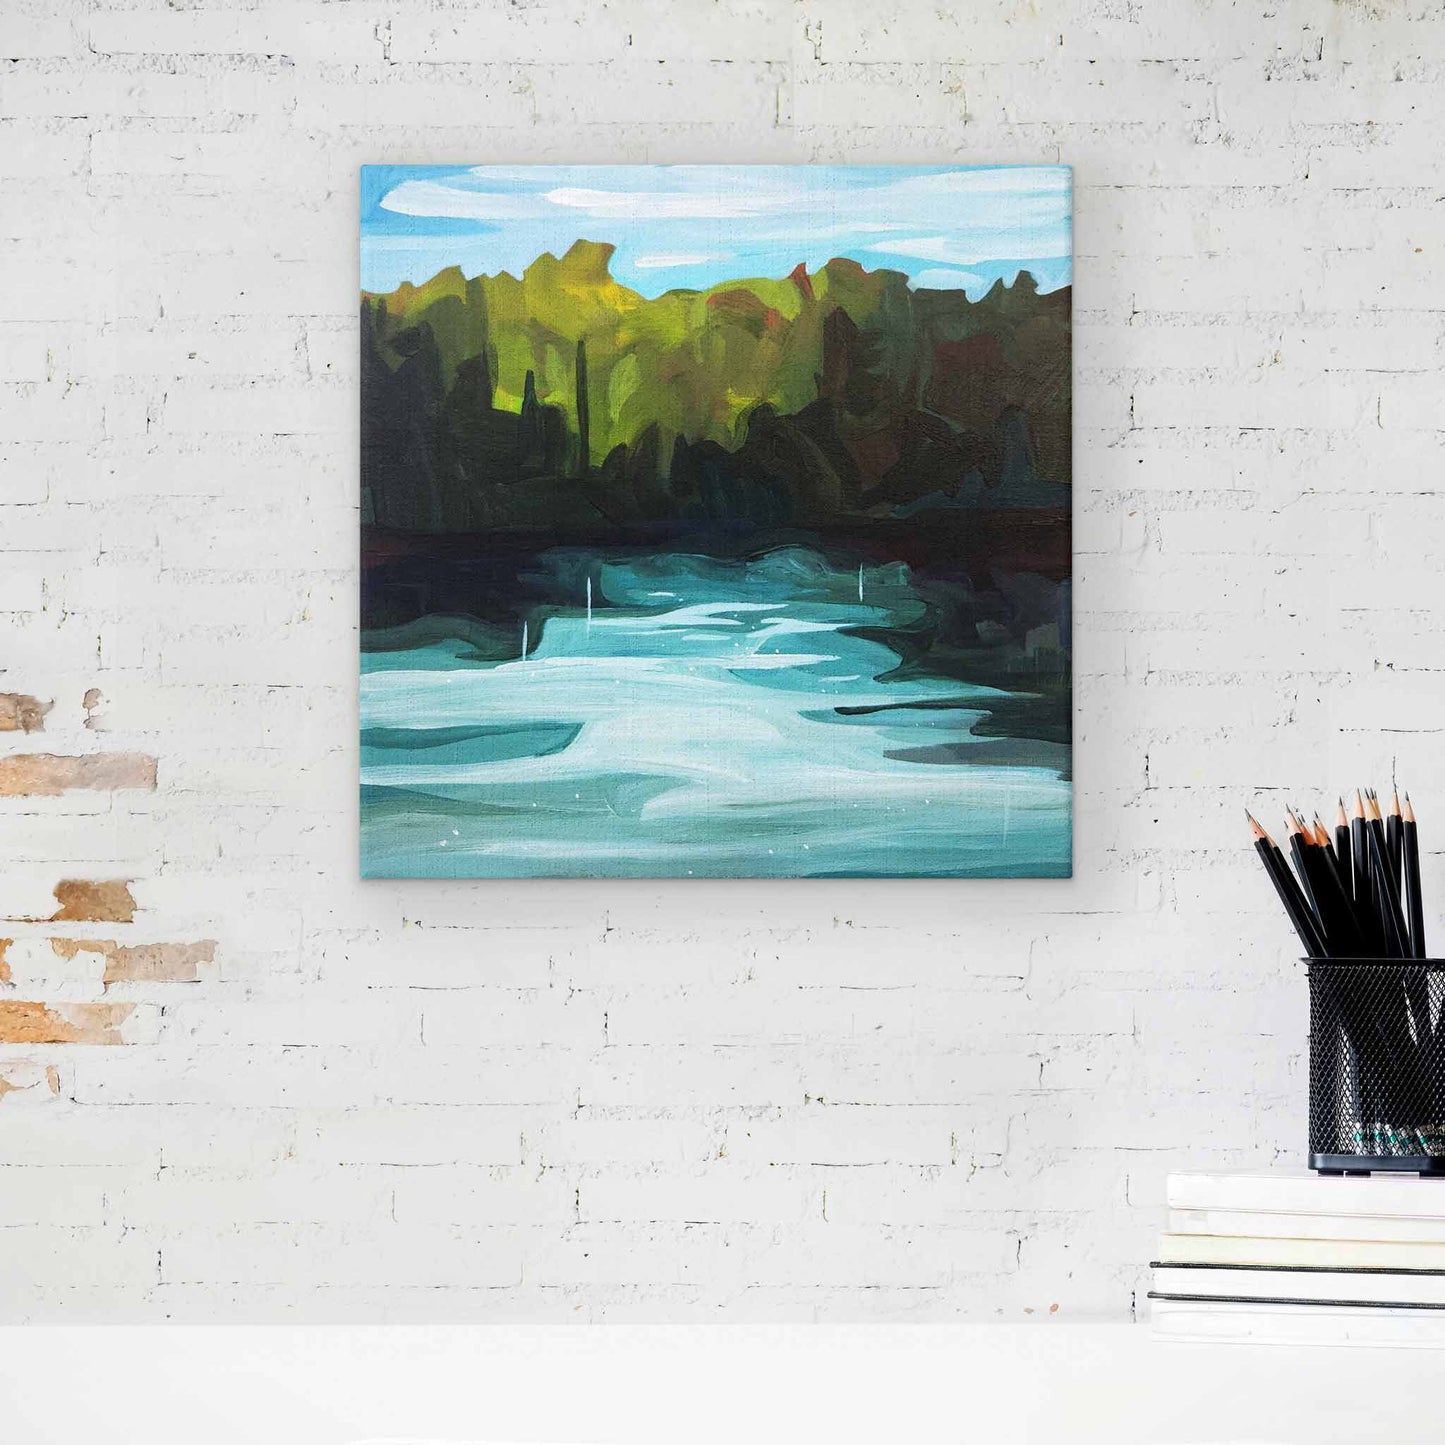 Small acrylic painting of an abstract forest landscape and lakeside view